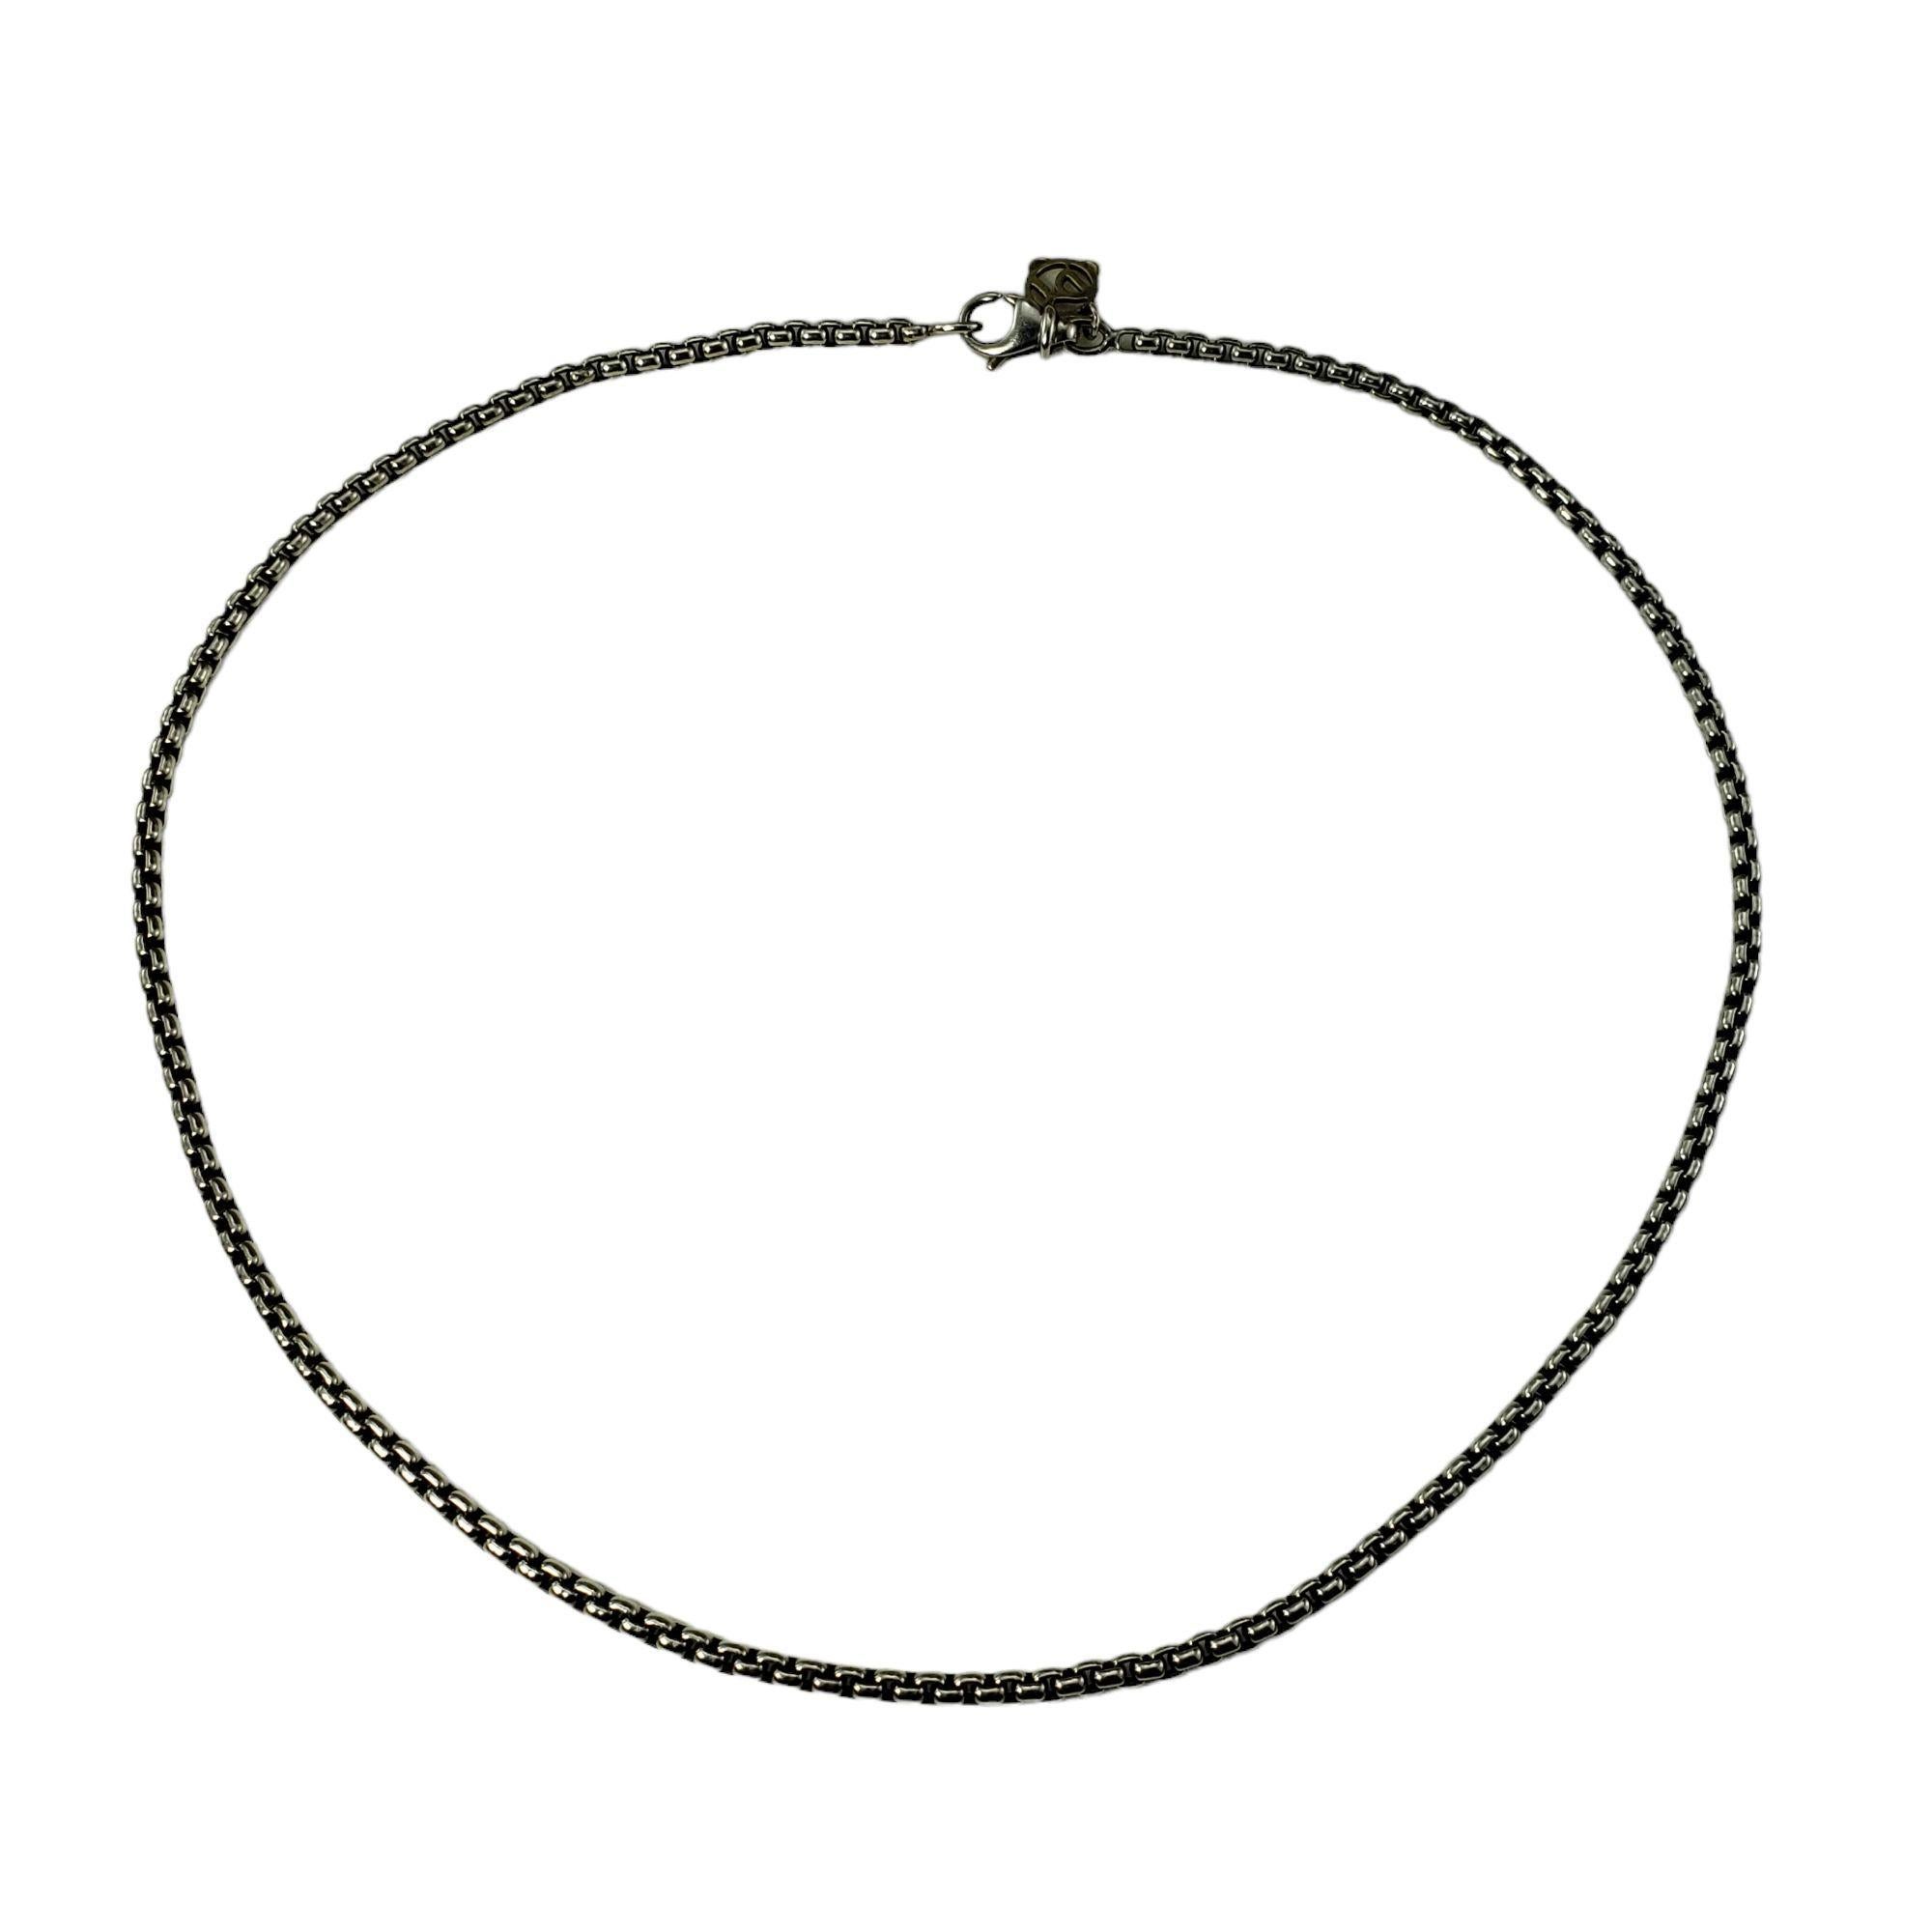 David Yurman Sterling Silver and 14 Karat Yellow Gold Cable Chain Necklace-

This elegant cable chain necklace by David Yurman is crafted in sterling silver and features a 14K yellow gold DY tag. Width: 3 mm.

Size: 15 inches

Weight: 7.7 dwt.